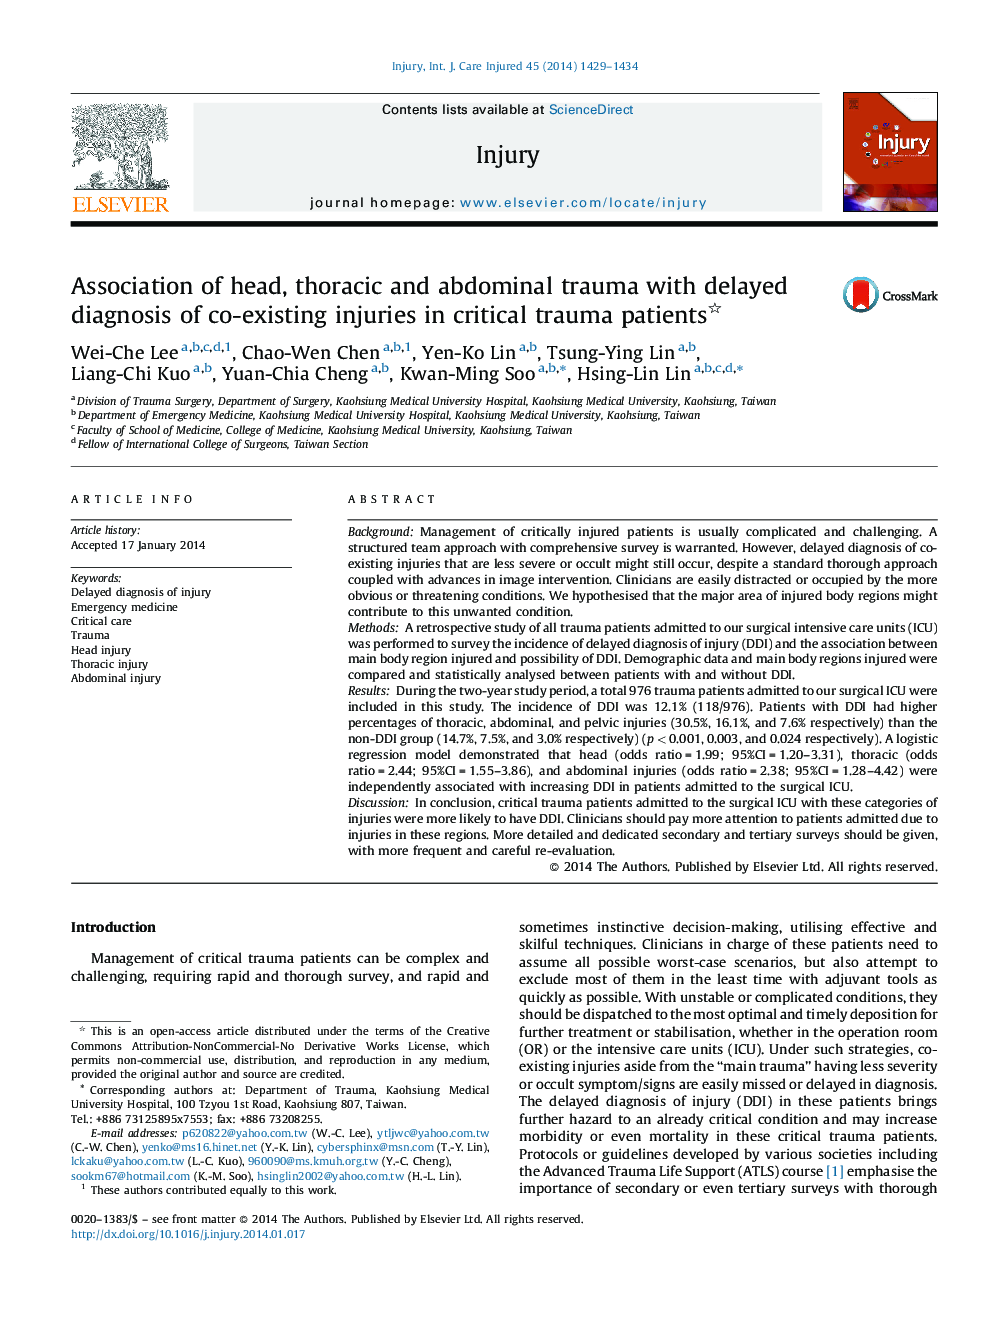 Association of head, thoracic and abdominal trauma with delayed diagnosis of co-existing injuries in critical trauma patients